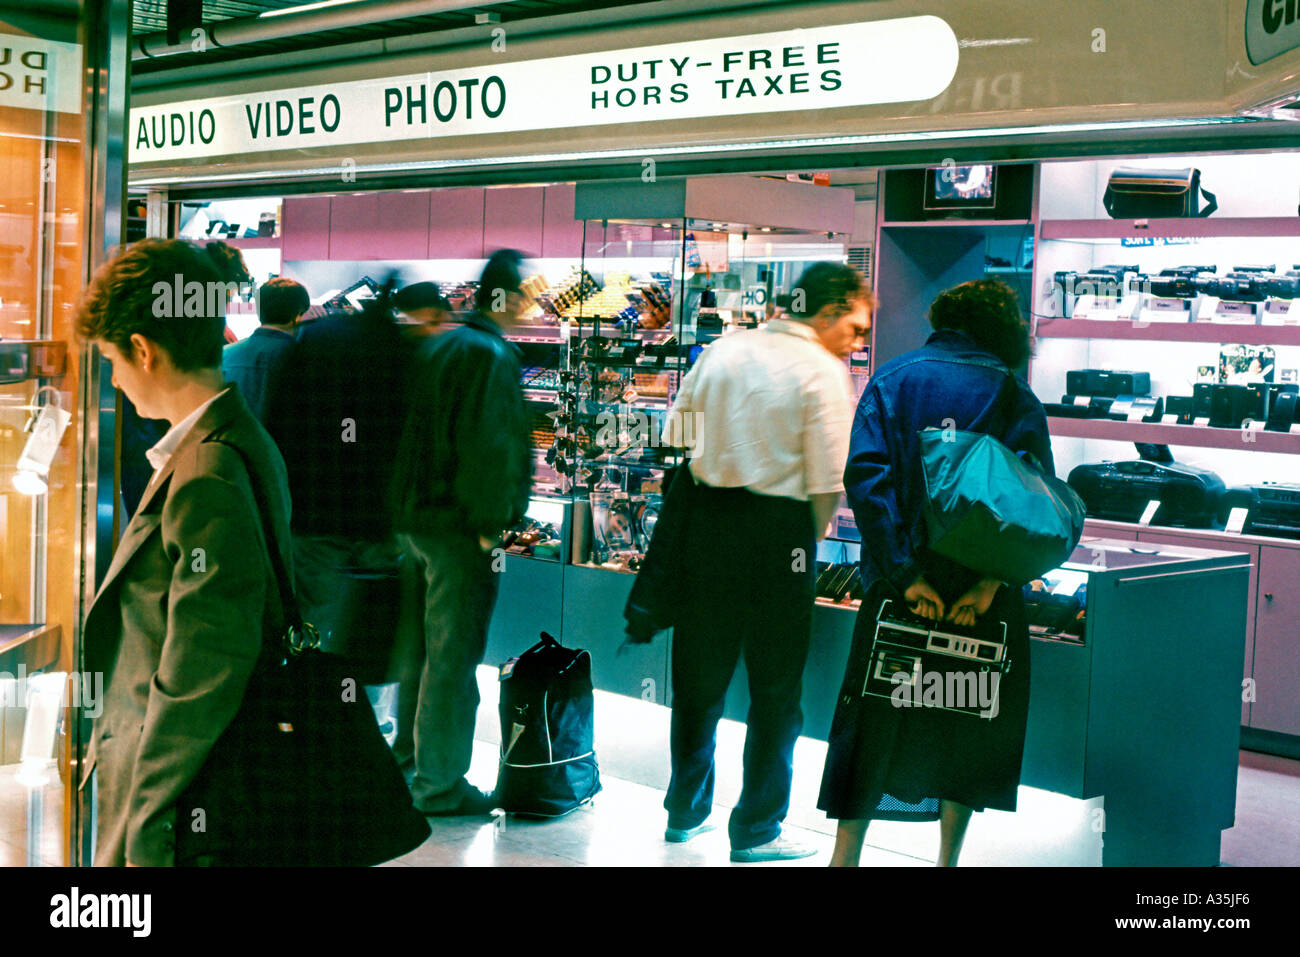 PARIS France, View, Large Crowd People, Tourists in airport duty free shopping Store in 'Orly Airport' Photo Equipment Travel Business Stock Photo